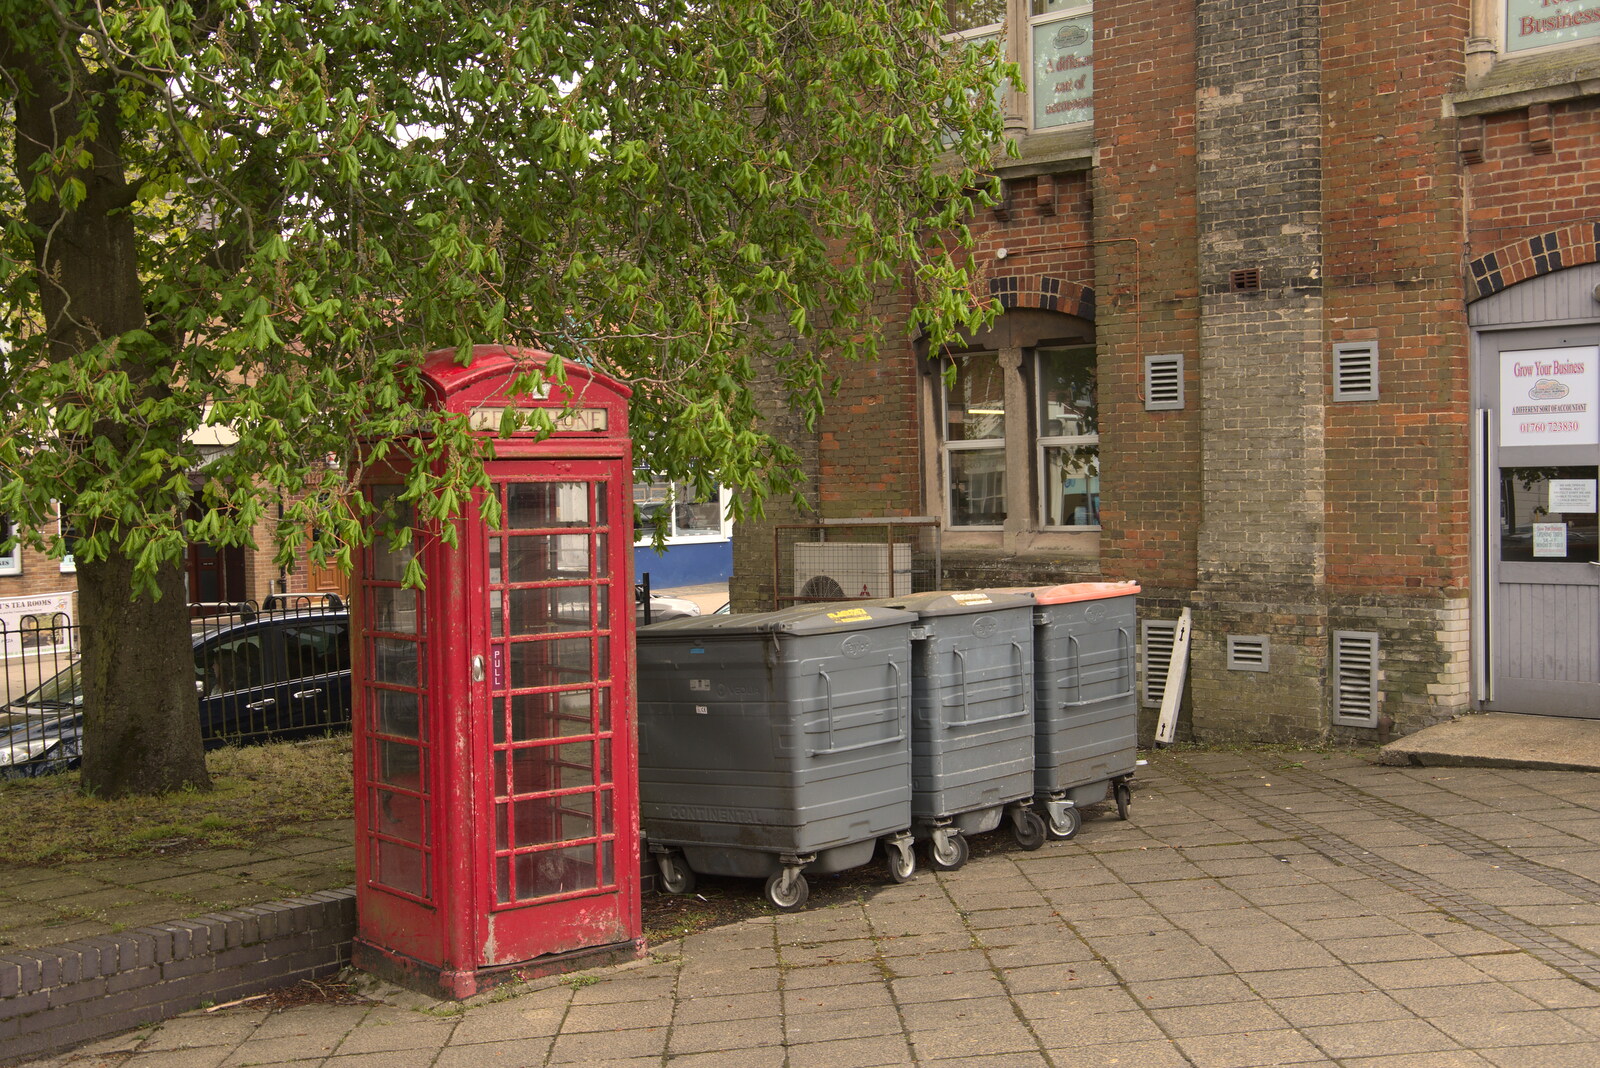 A derelict K6 phone box from A Vaccination Afternoon, Swaffham, Norfolk - 9th May 2021